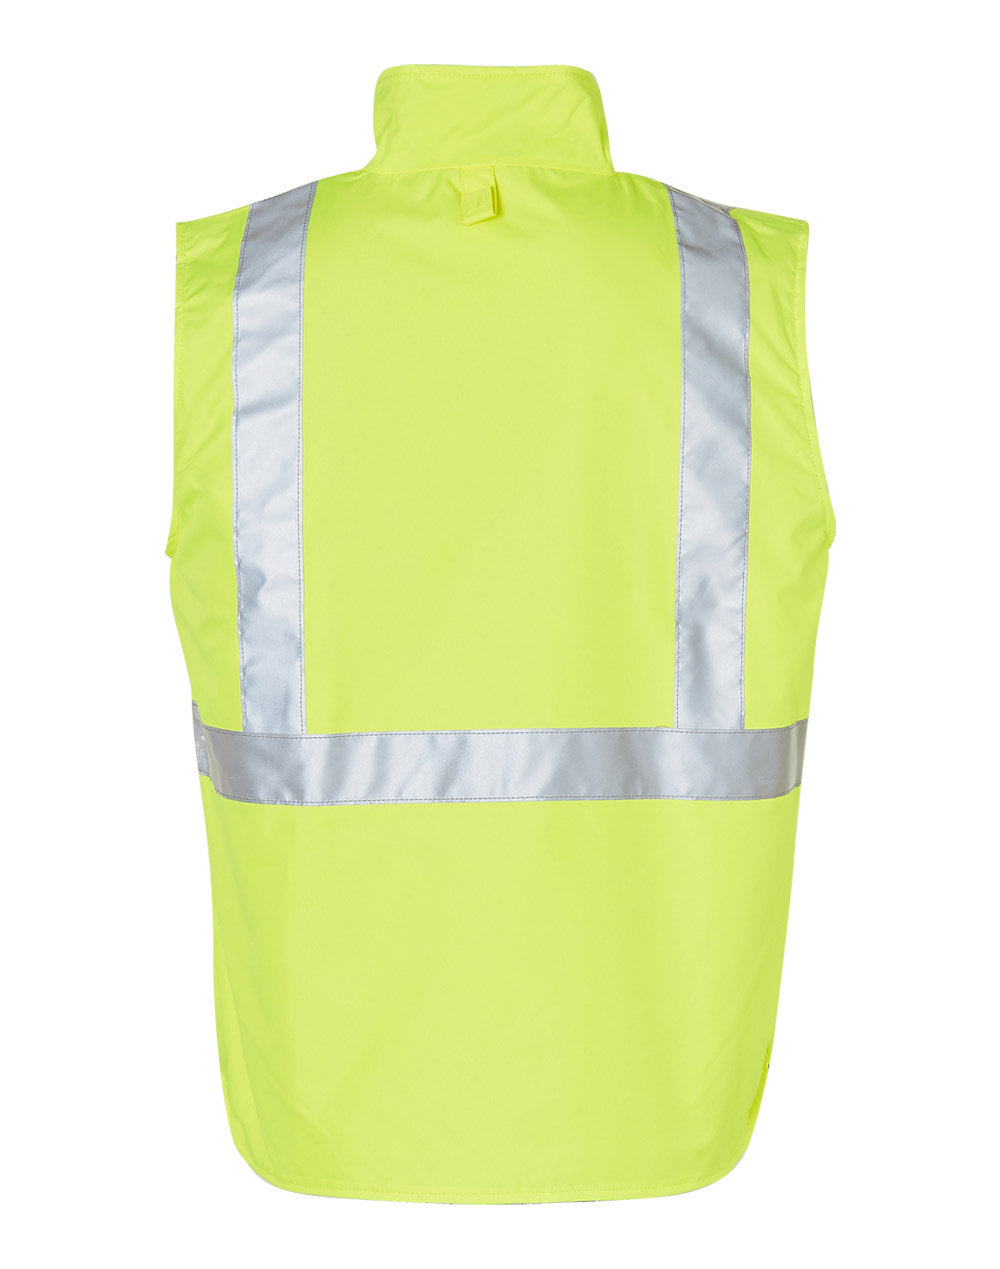 AIW SW19A HI-VIS REVERSIBLE SAFETY VEST WITH 3M TAPES